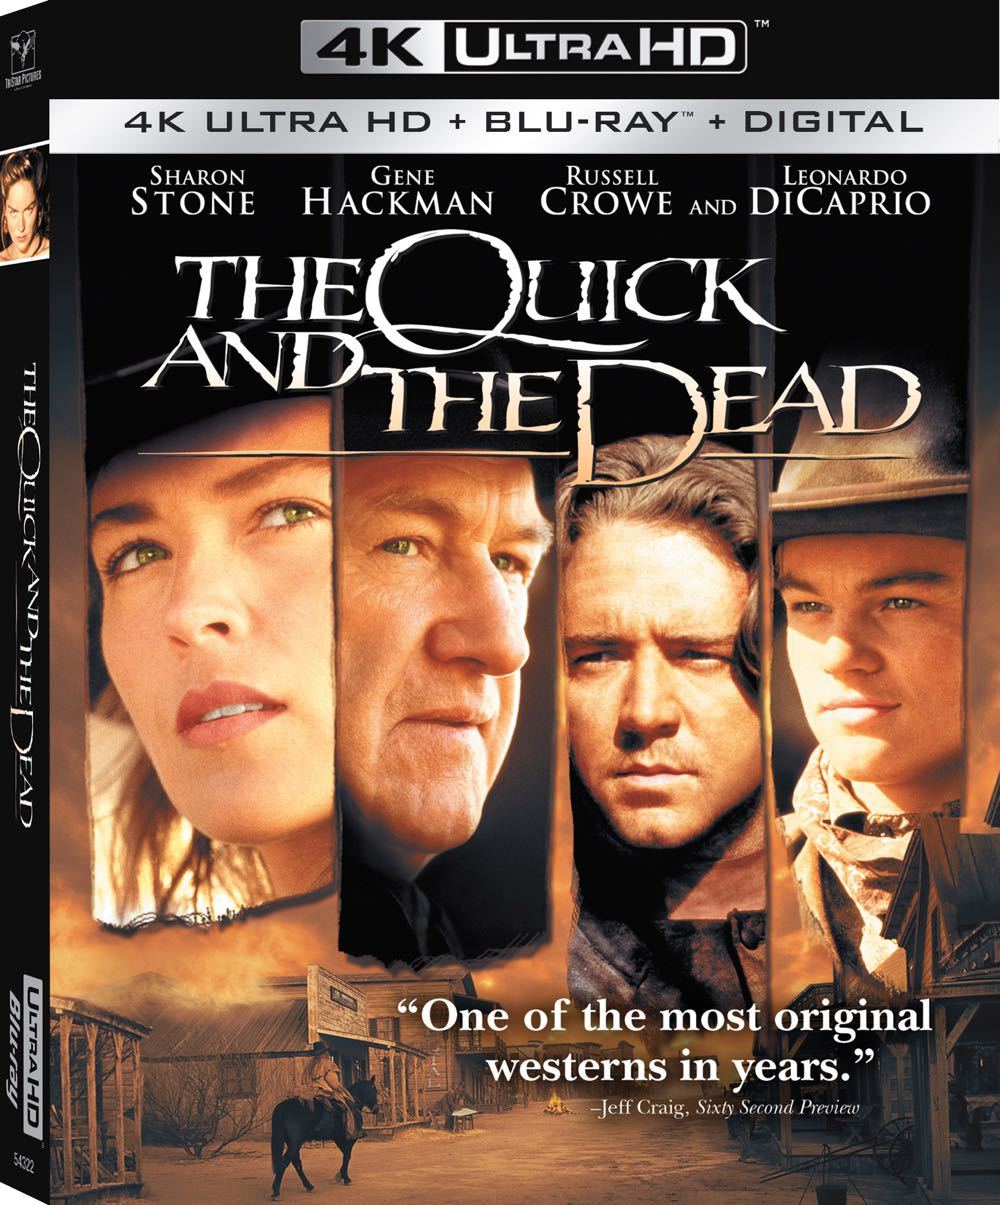 The Quick and the Dead 4K (Slip)